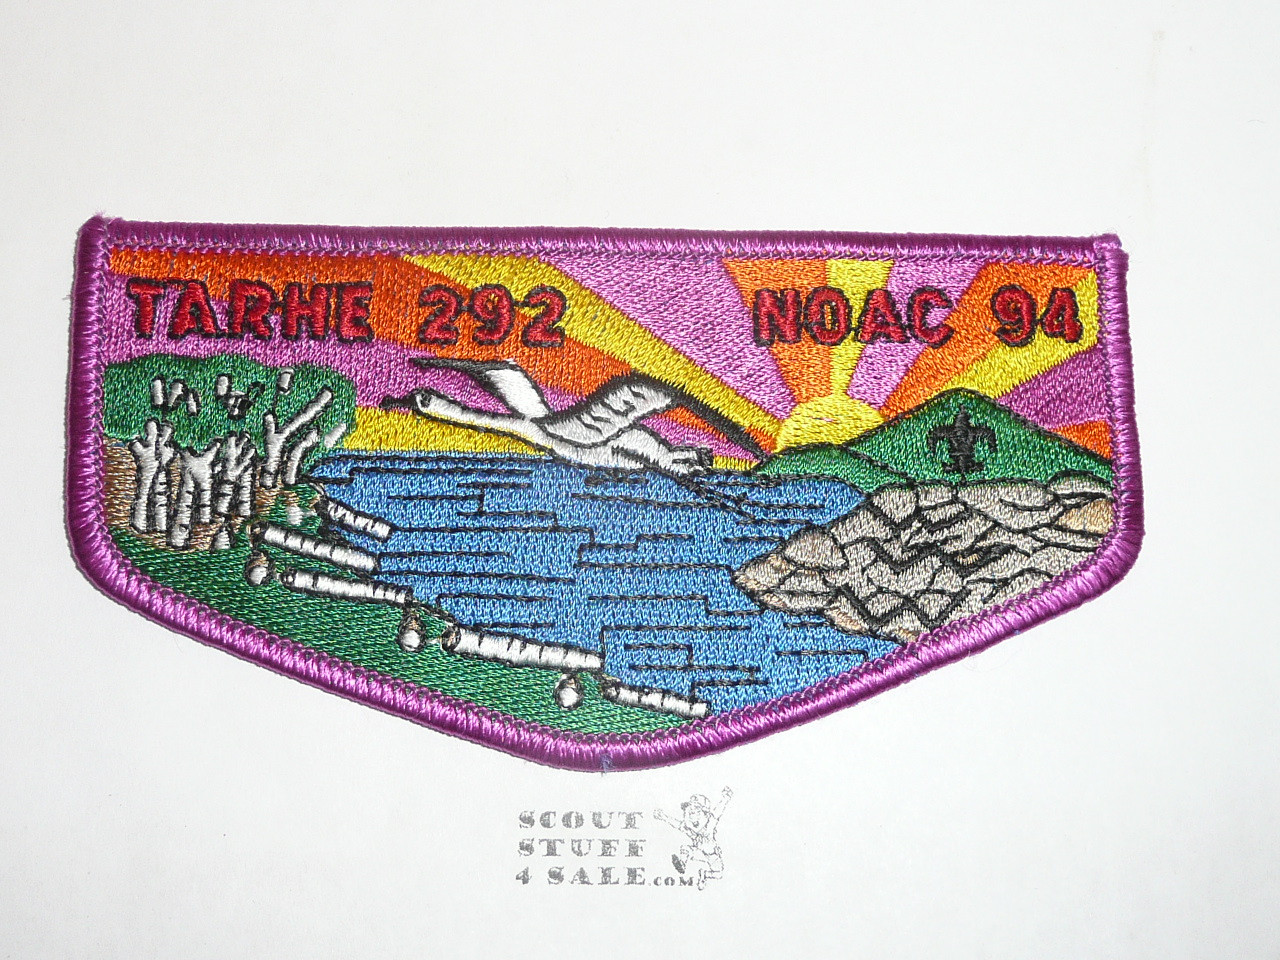 Order of the Arrow Lodge #292 Tarhe s20 1994 NOAC Flap Patch